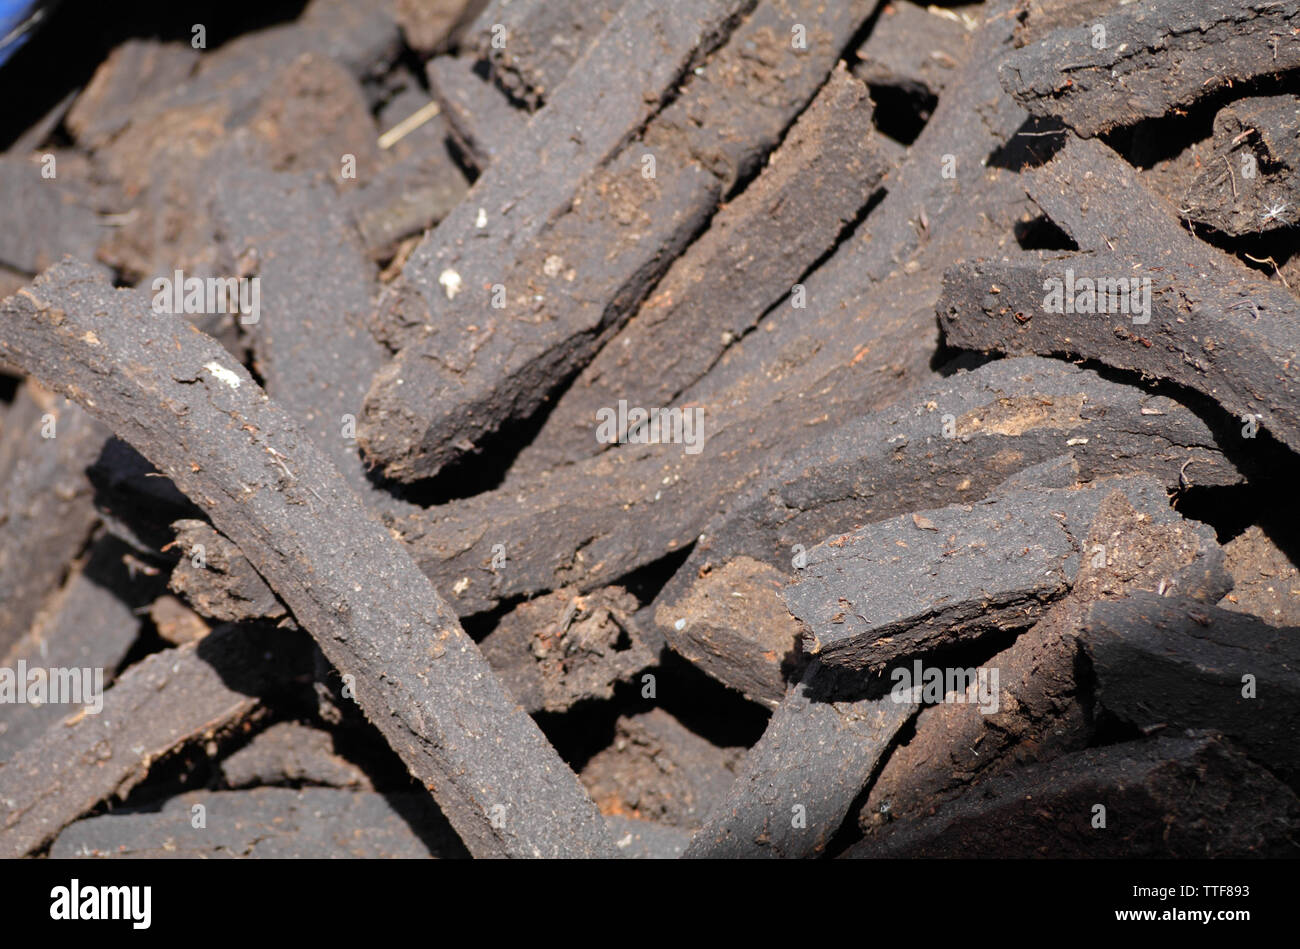 Milled peat briquettes in a small rural farm County Westmeath, Leinster Province, Ireland Stock Photo